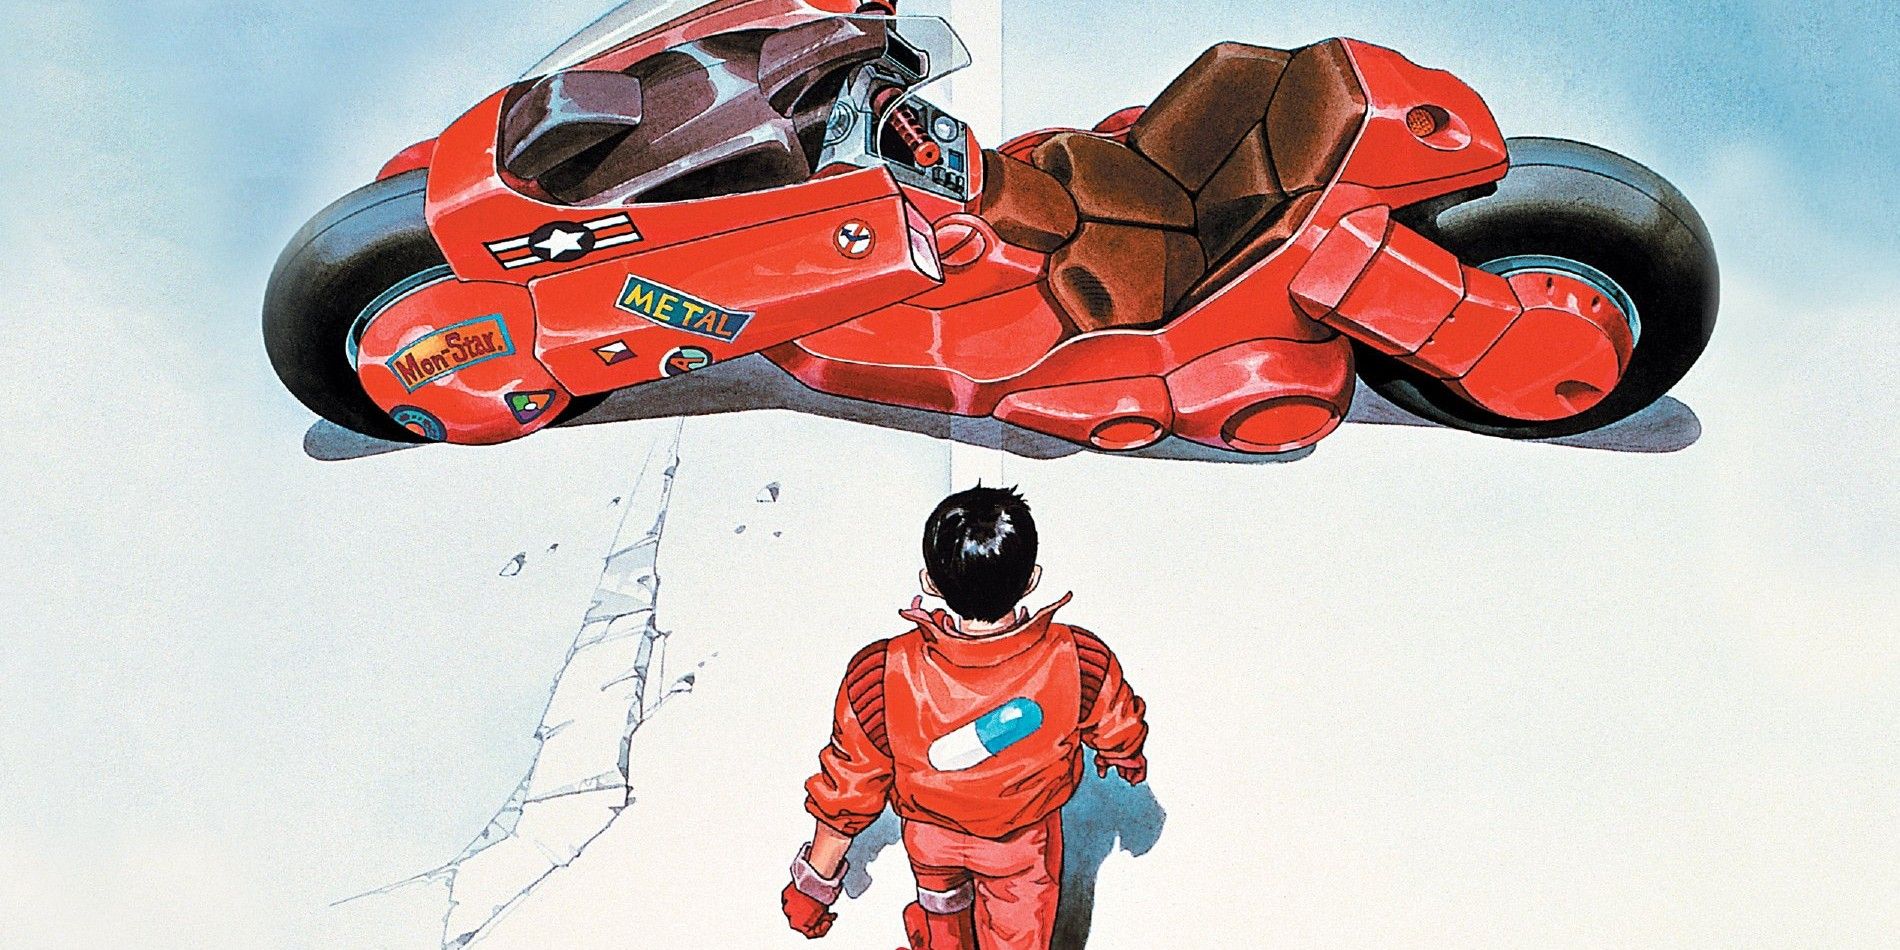 New Akira Anime TV Series In The Works From Original Creator